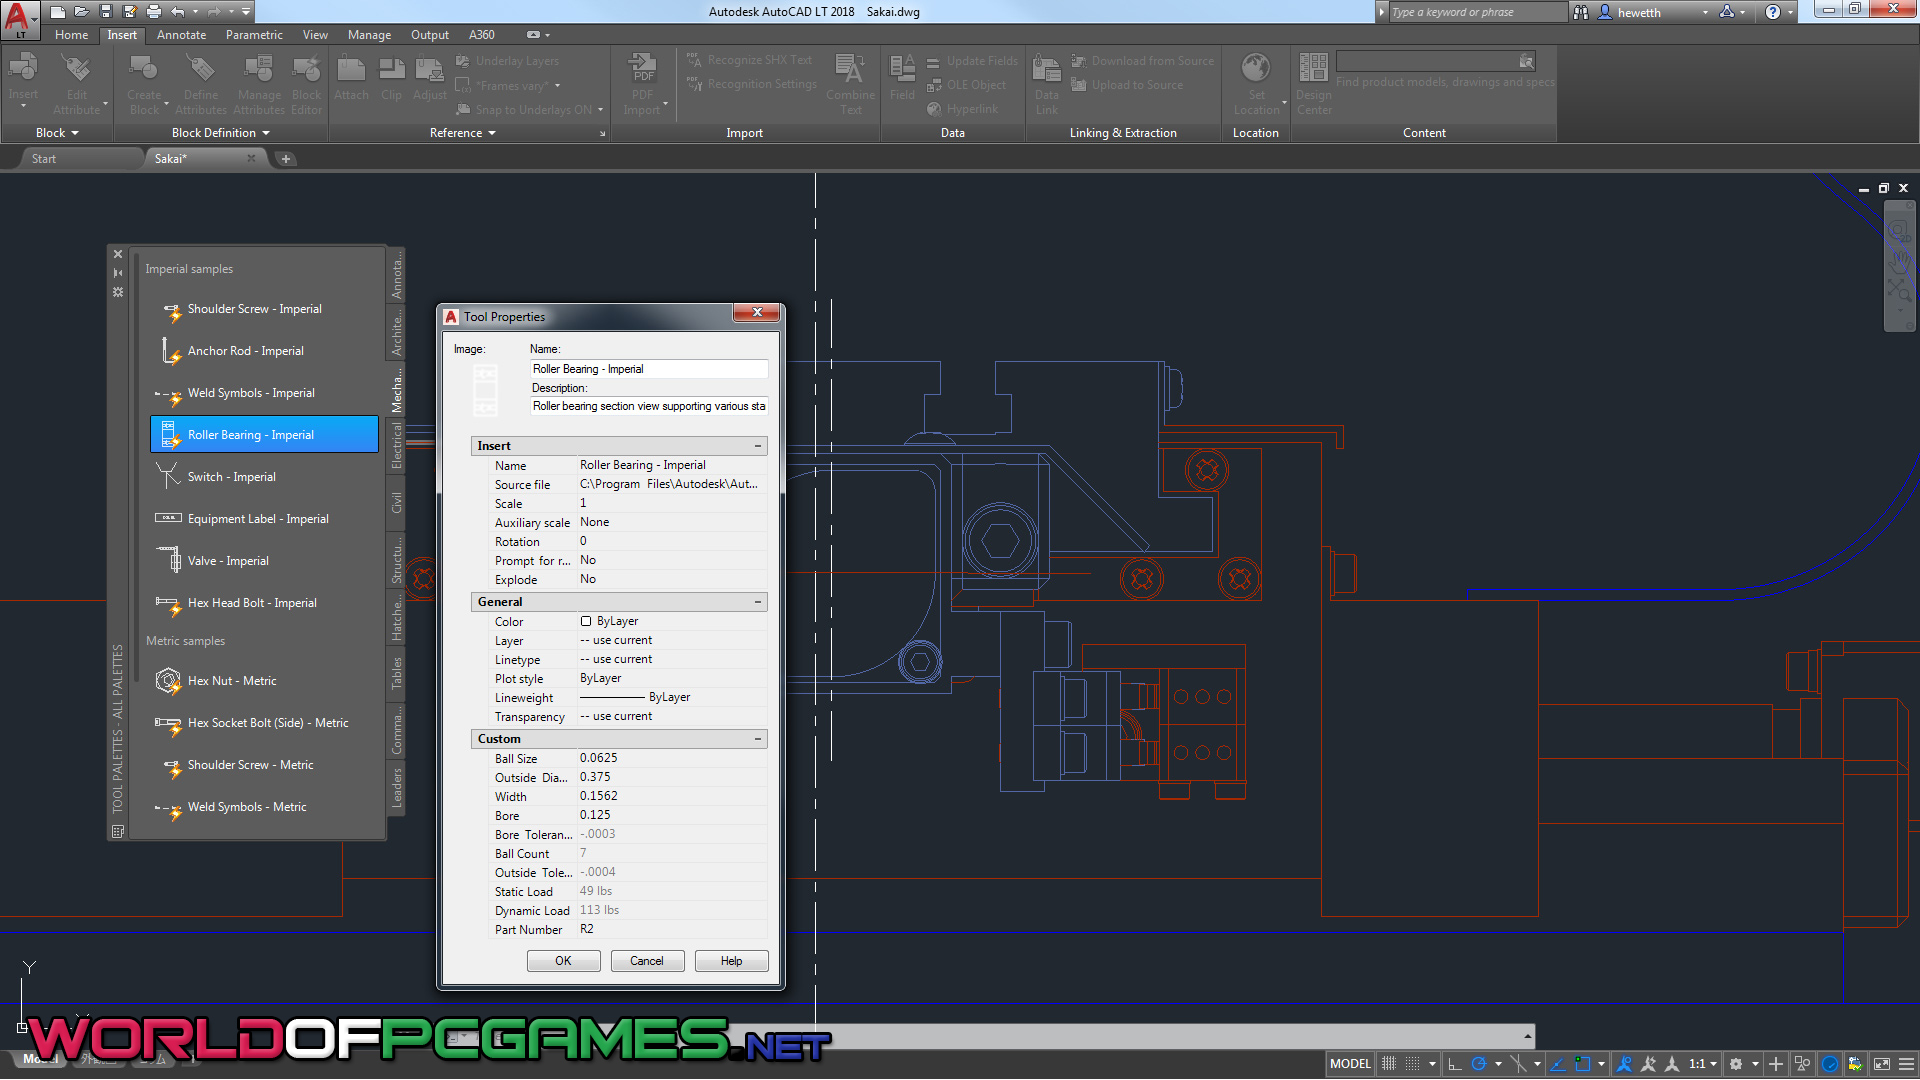 autocad 2010 for mac free download full version